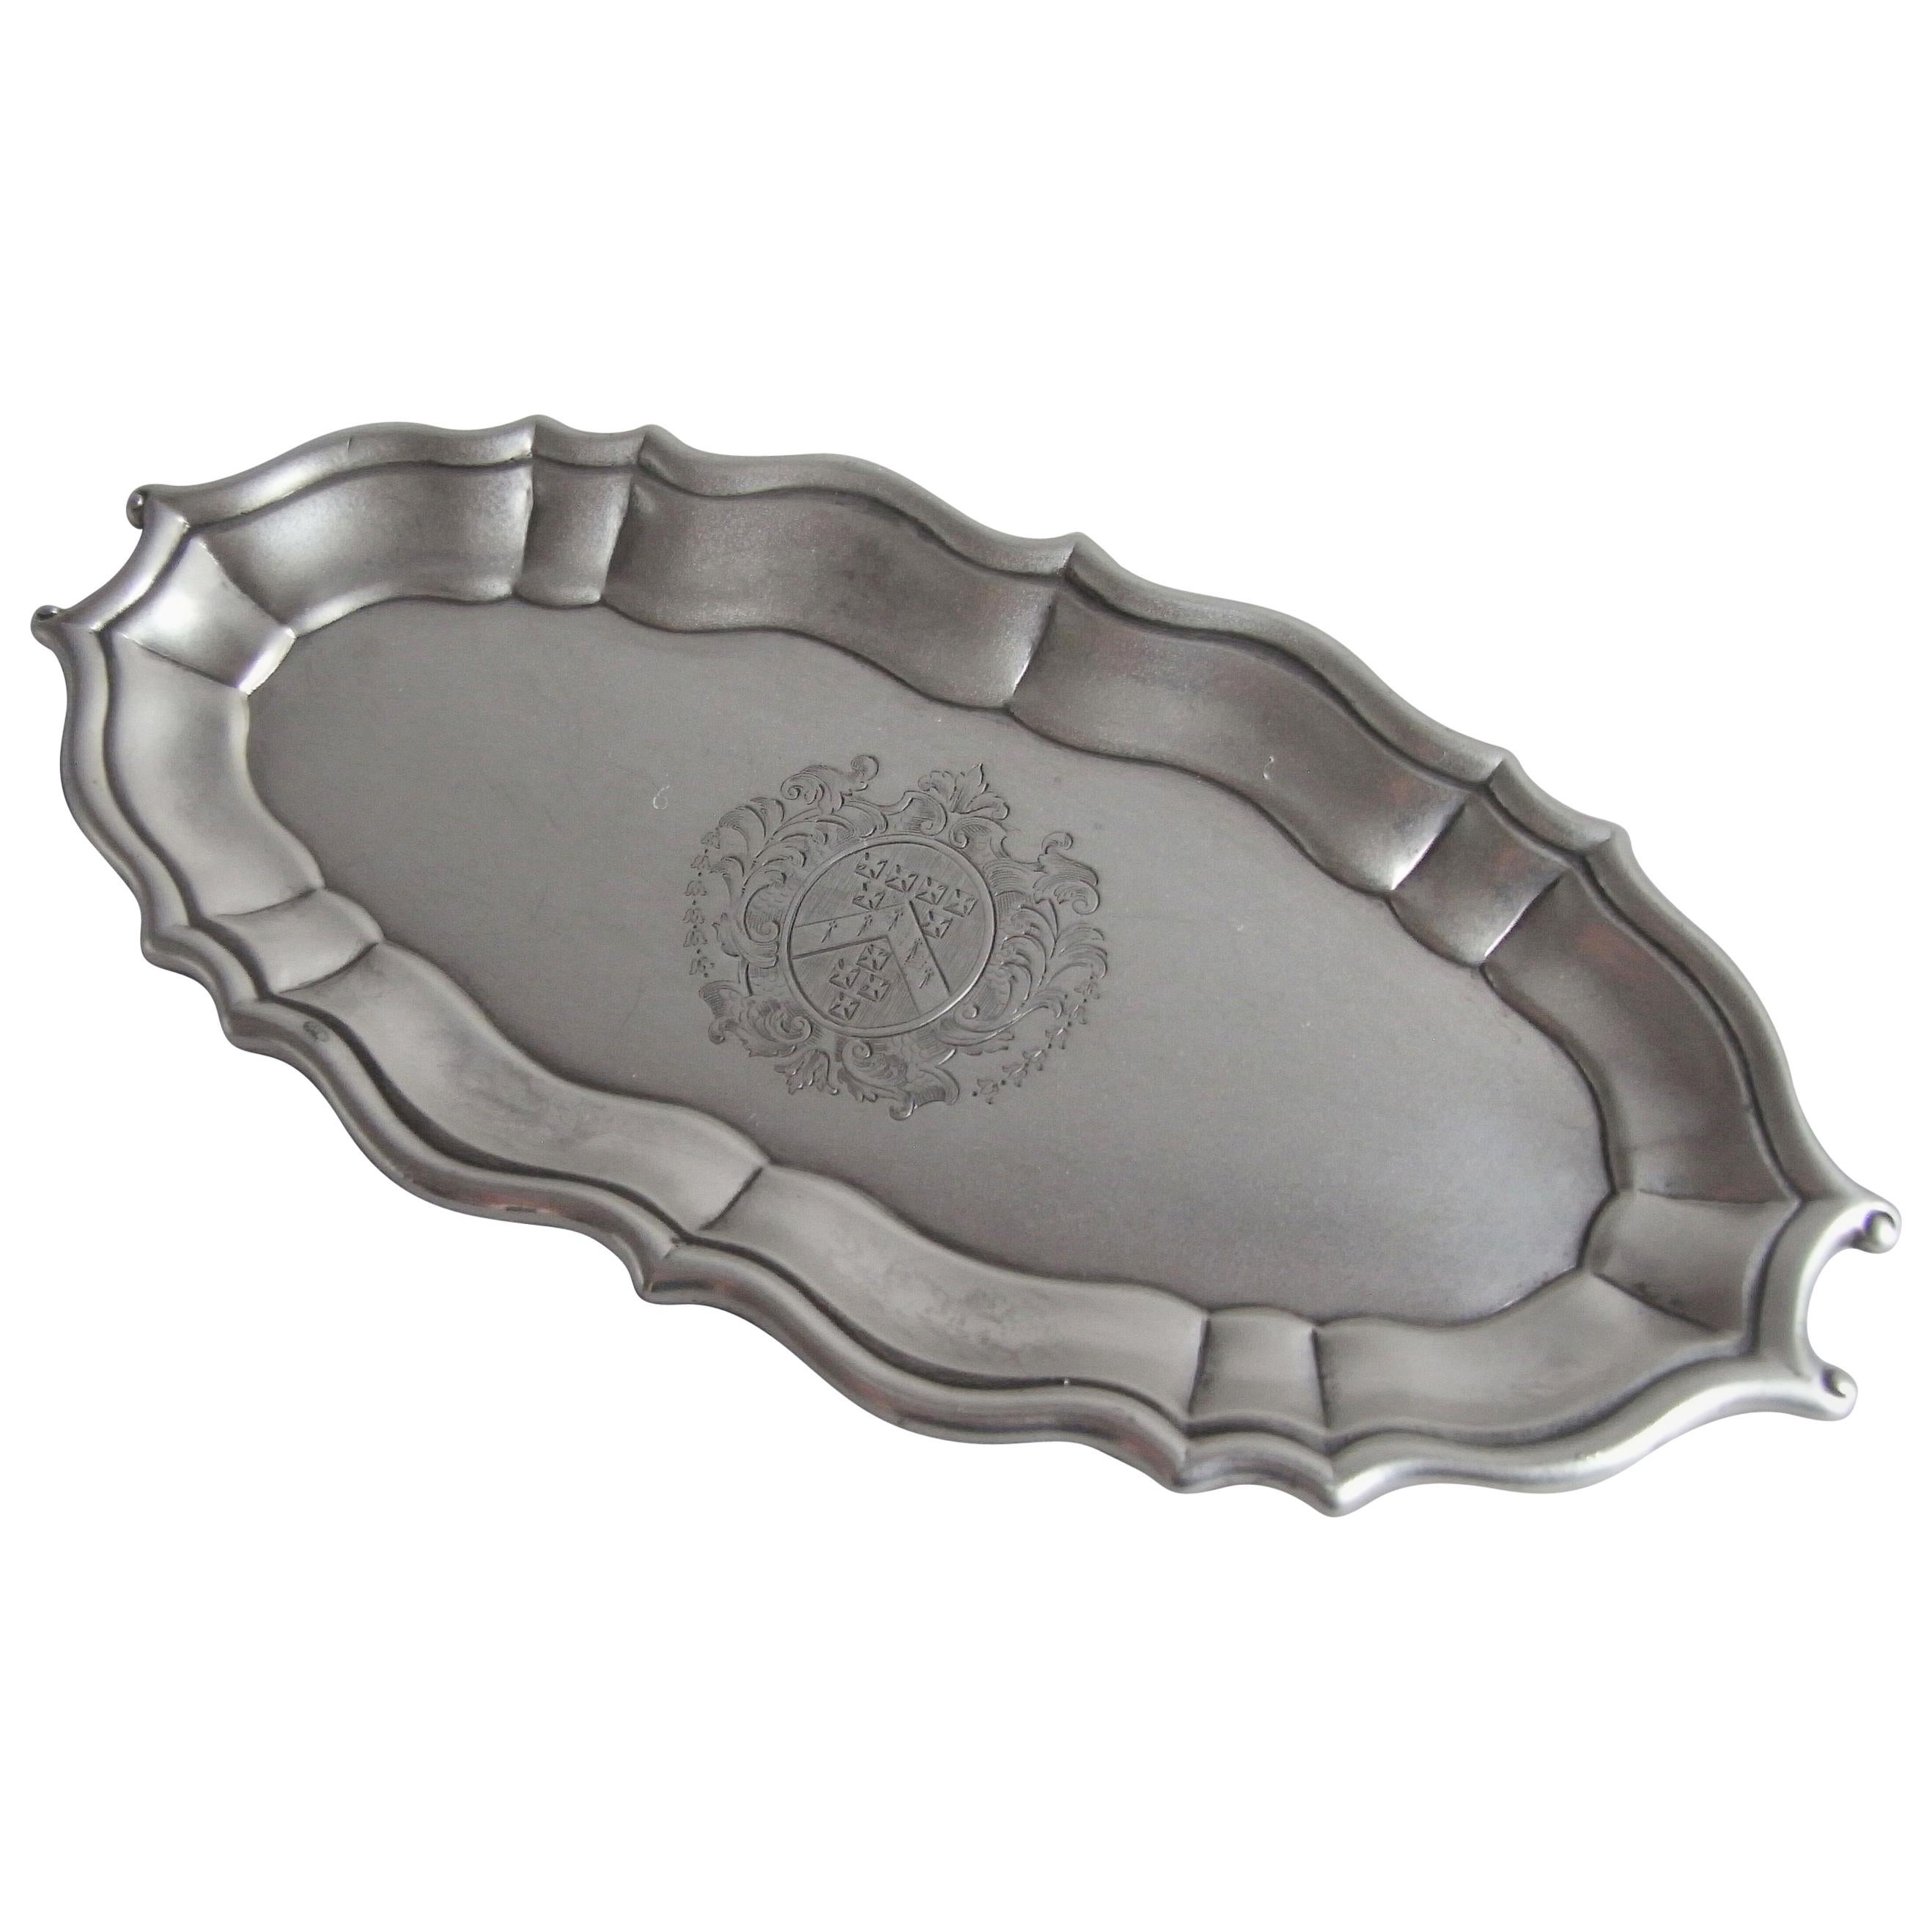 Extremely Rare George II Spoon Tray by John Robinson II